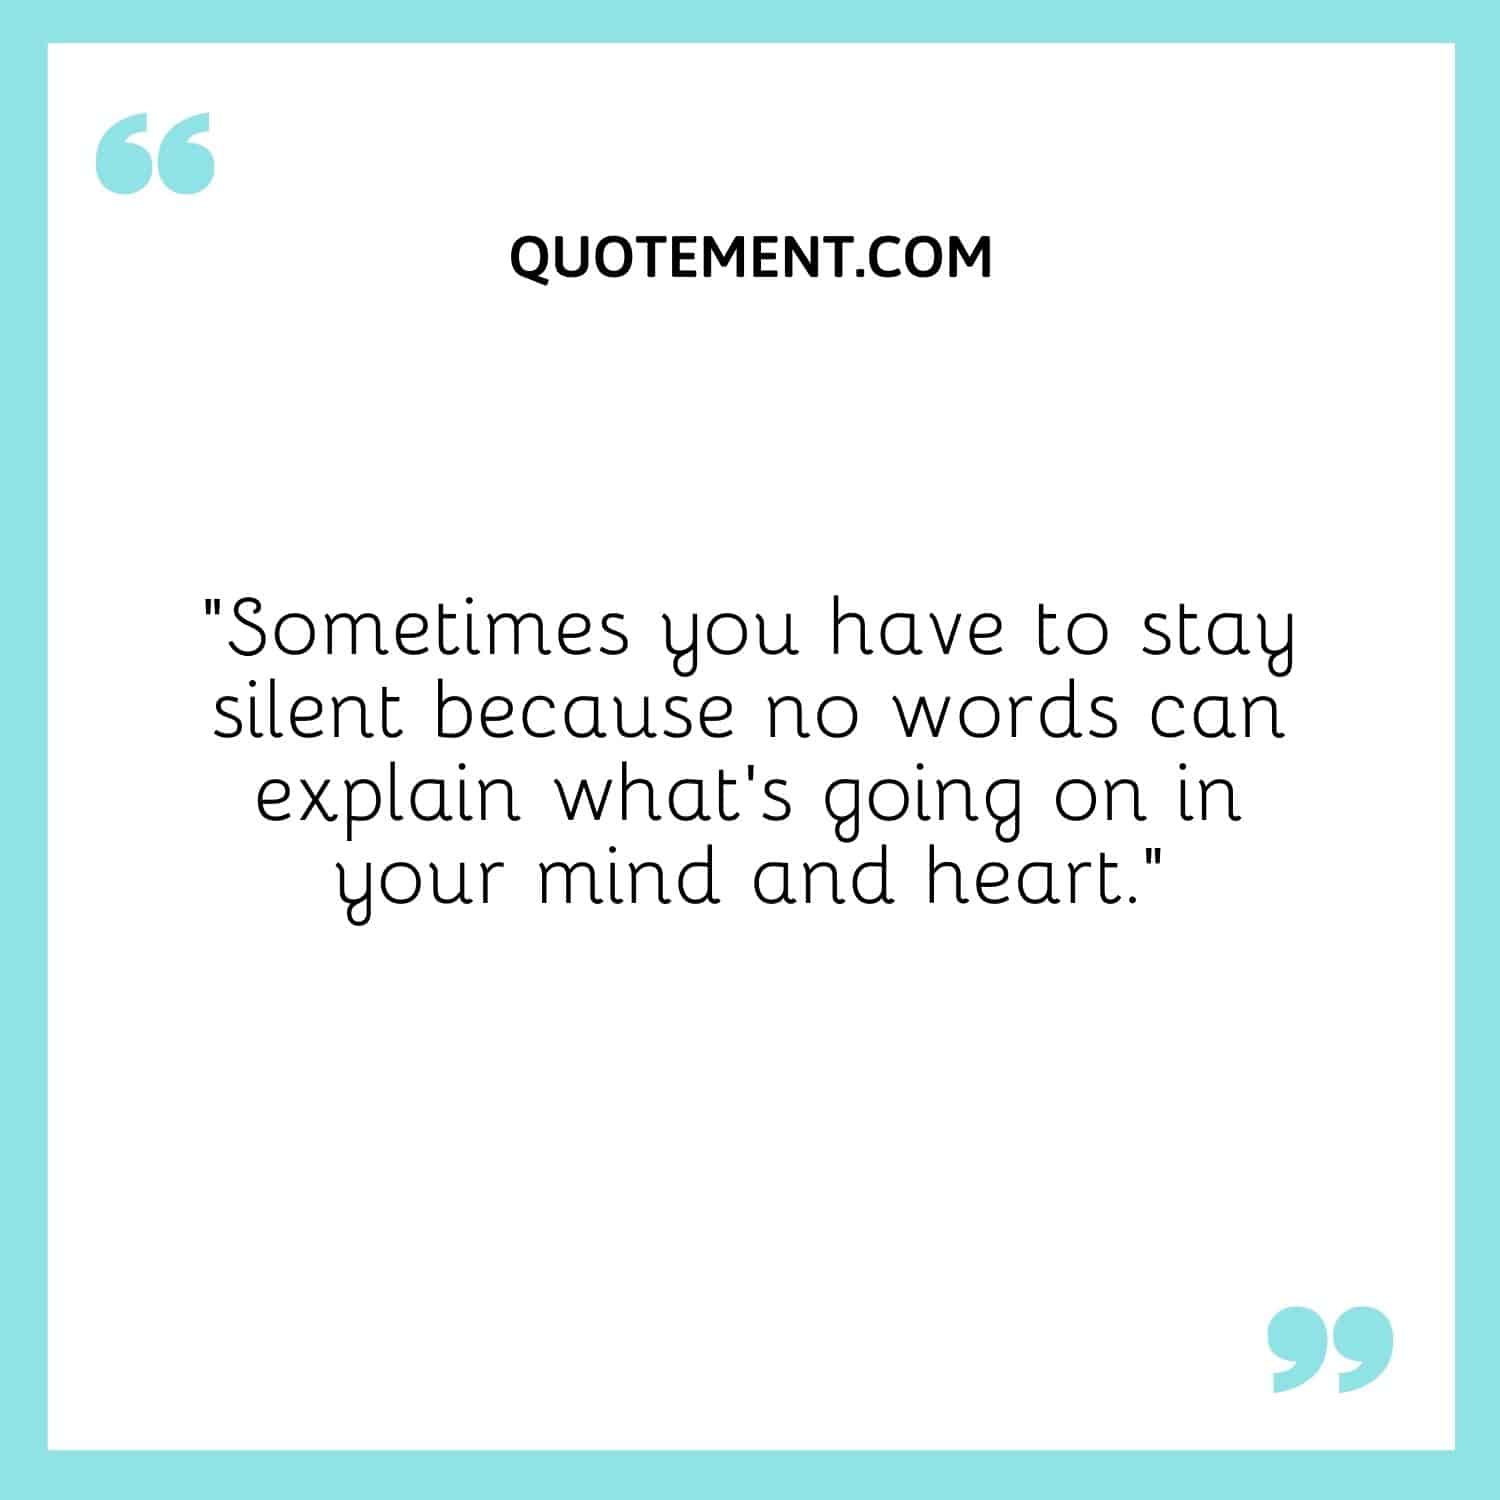 “Sometimes you have to stay silent because no words can explain what’s going on in your mind and heart.”